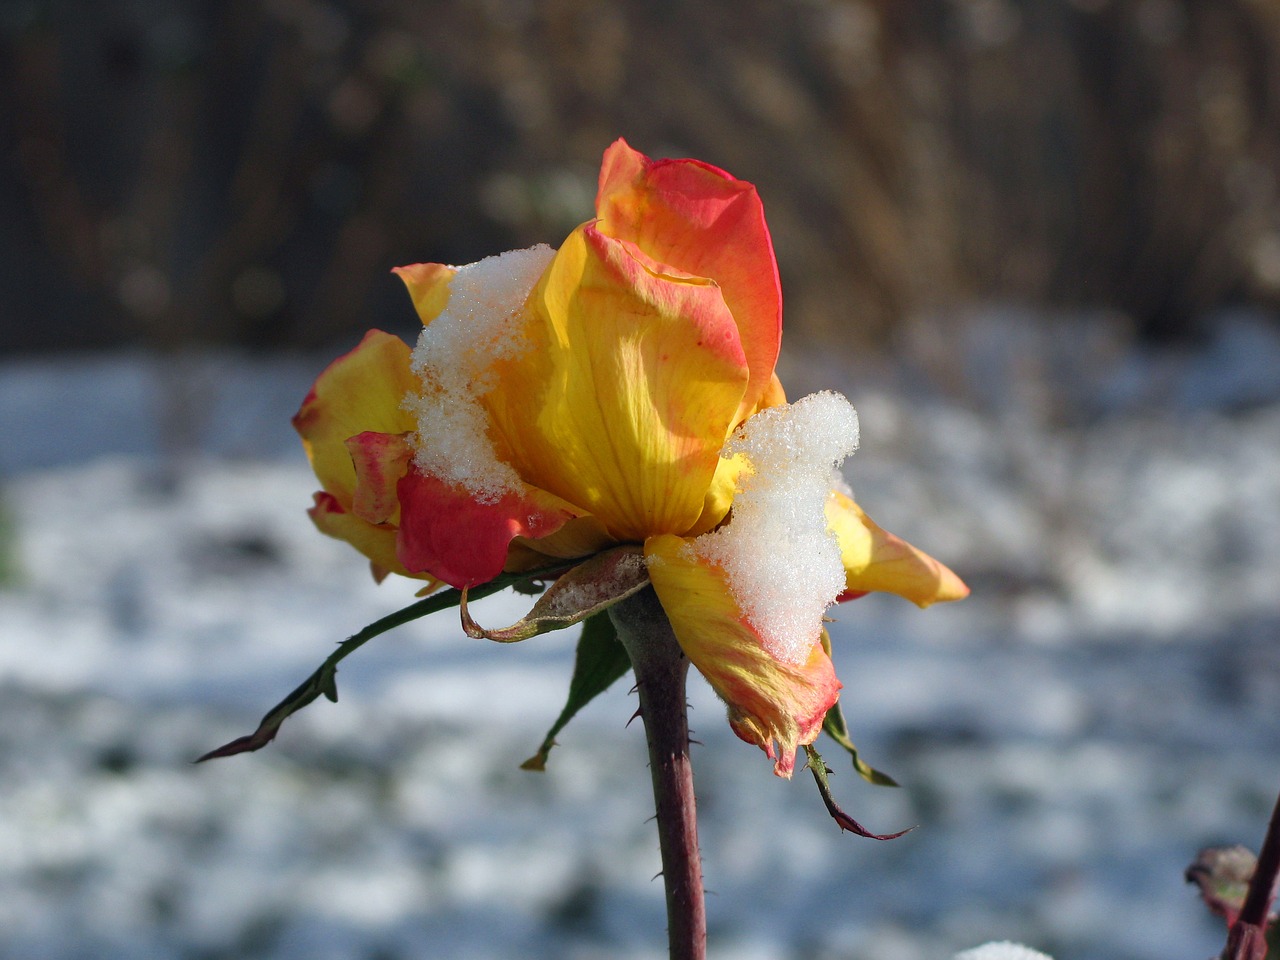 chicago peace tea rose early snow numb free photo